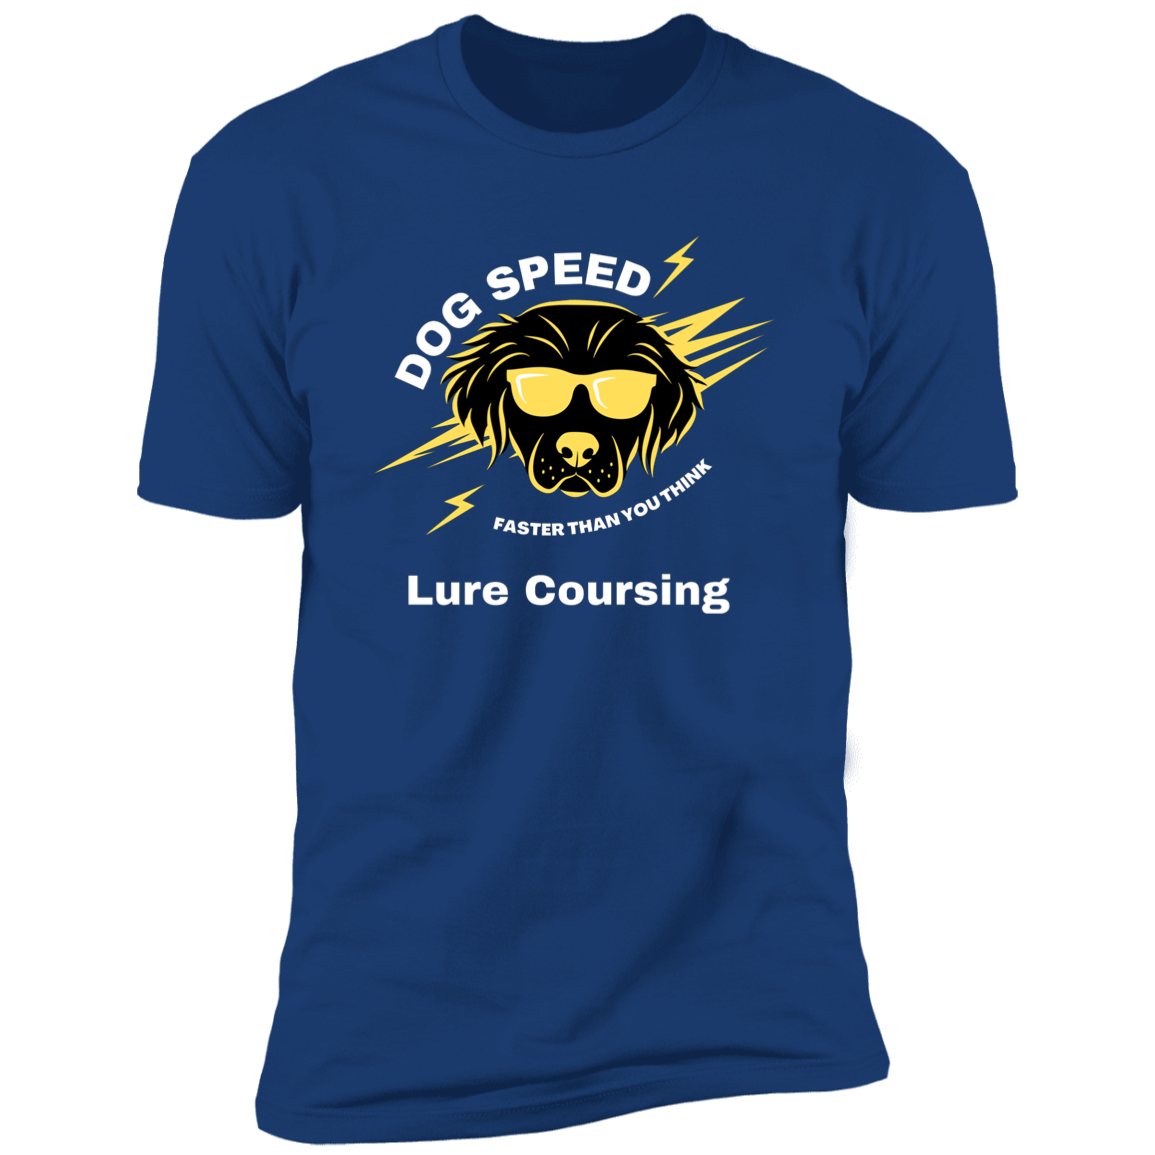 Dog Speed Faster Than You Think Lure Coursing T-shirt, Lure Coursing shirt dog shirt for humans, in royal blue